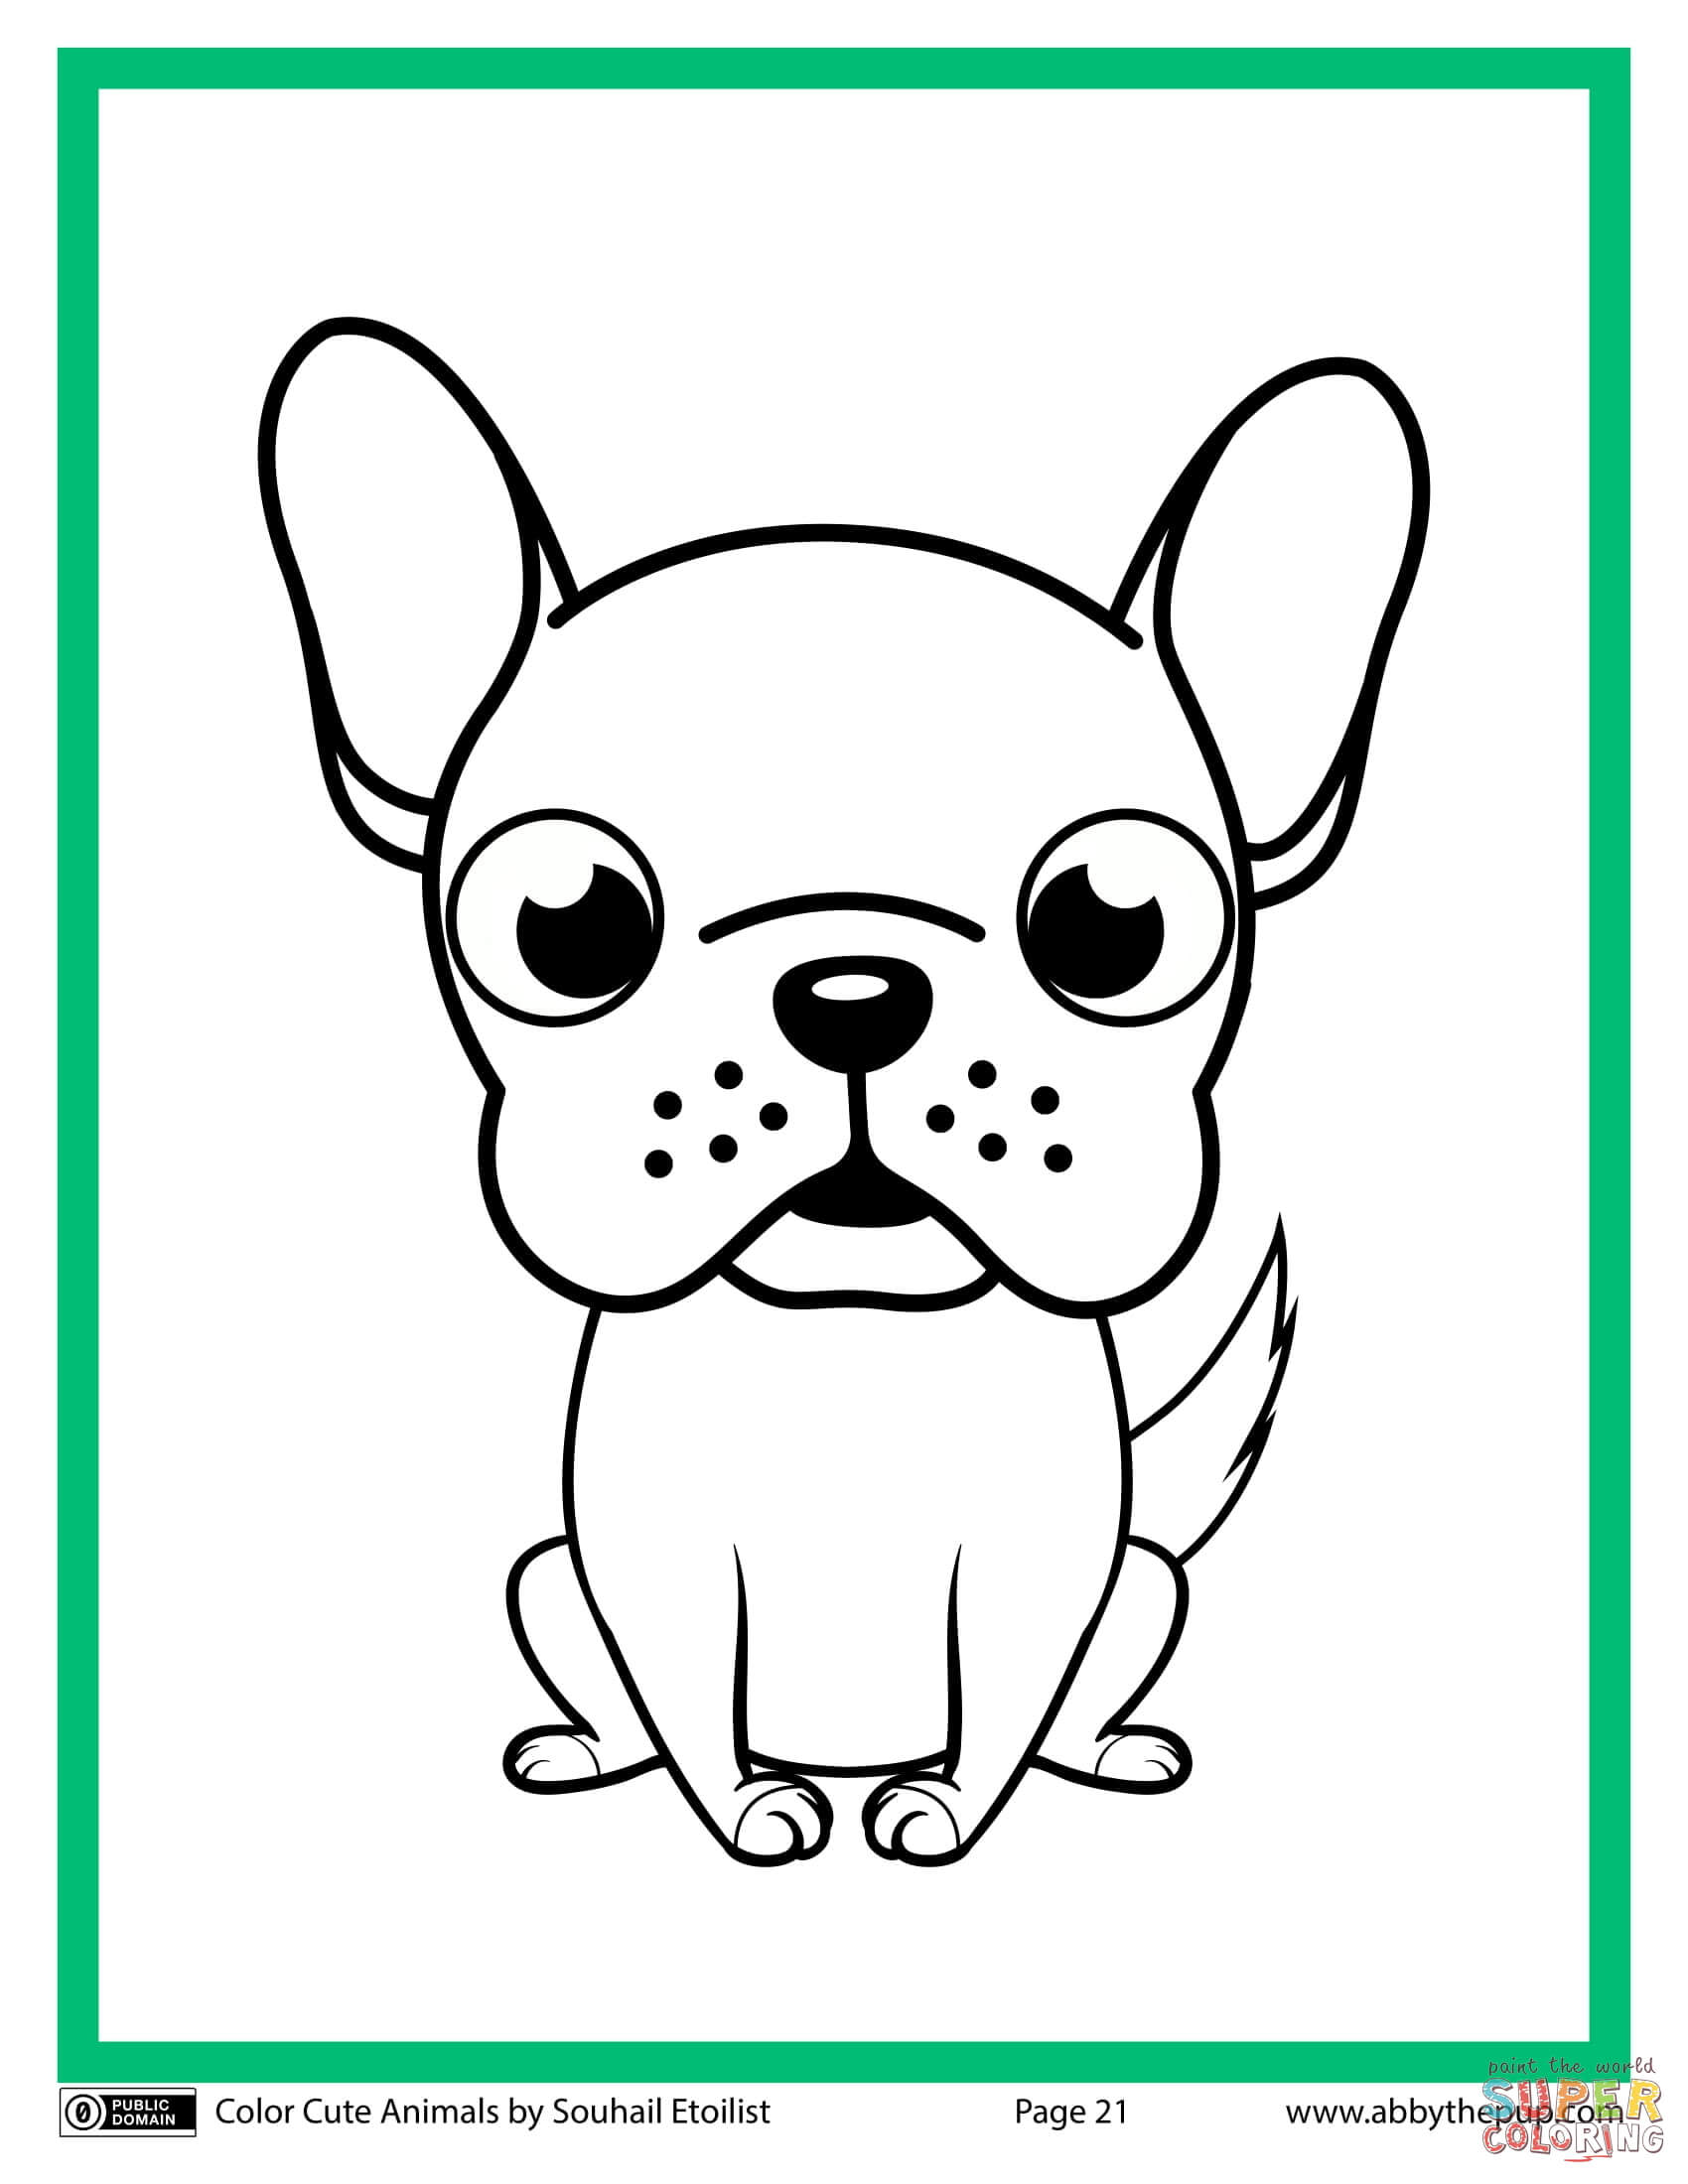 Cute Dog coloring page | Free Printable Coloring Pages